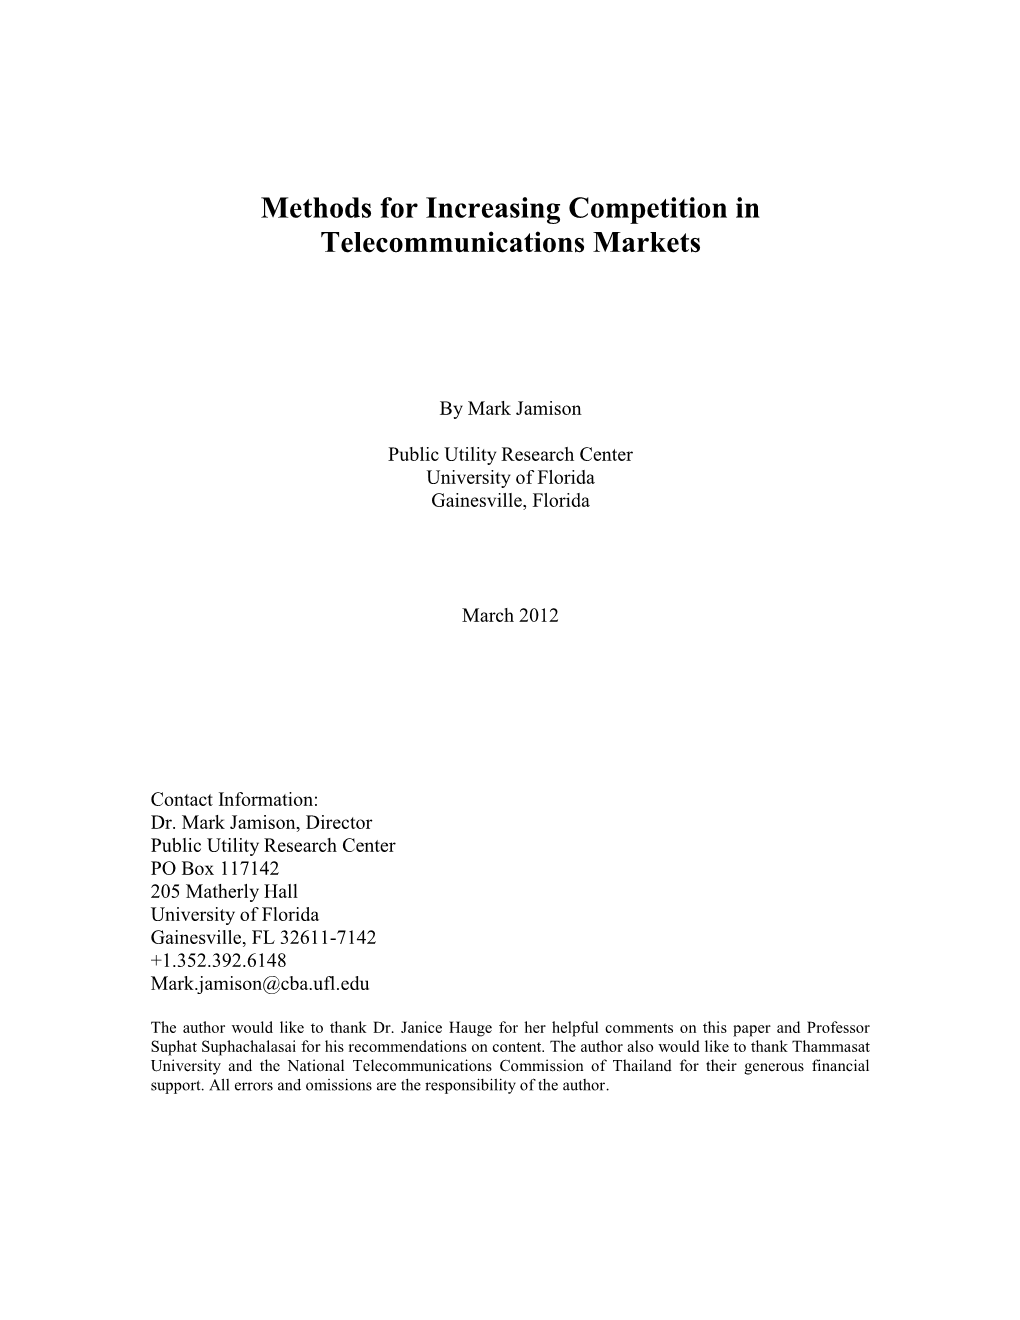 Methods for Increasing Competition in Telecommunications Markets